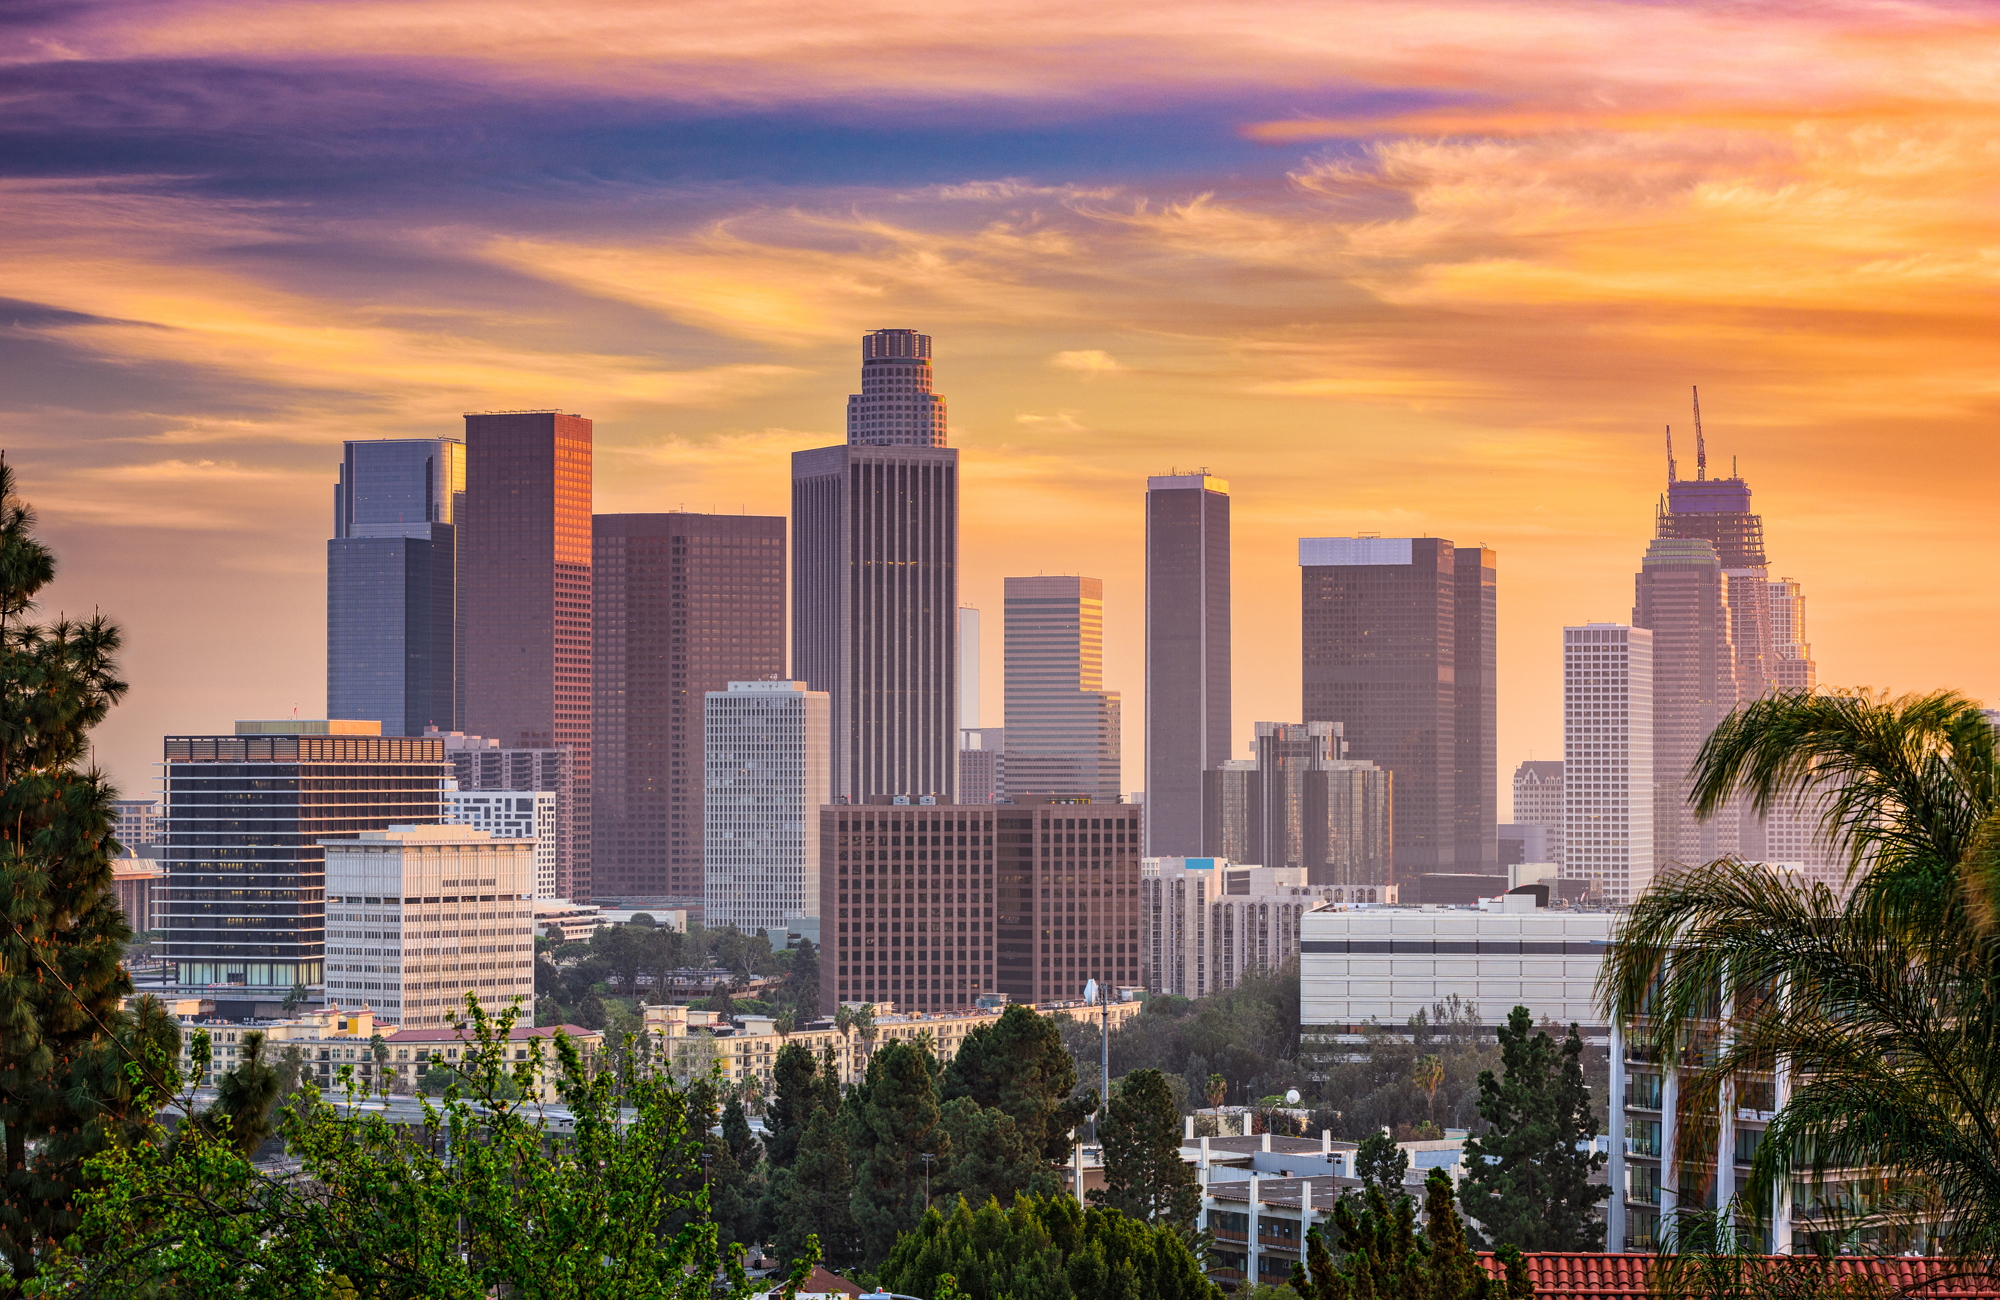 Hotels in Los Angeles | Fodor's Travel